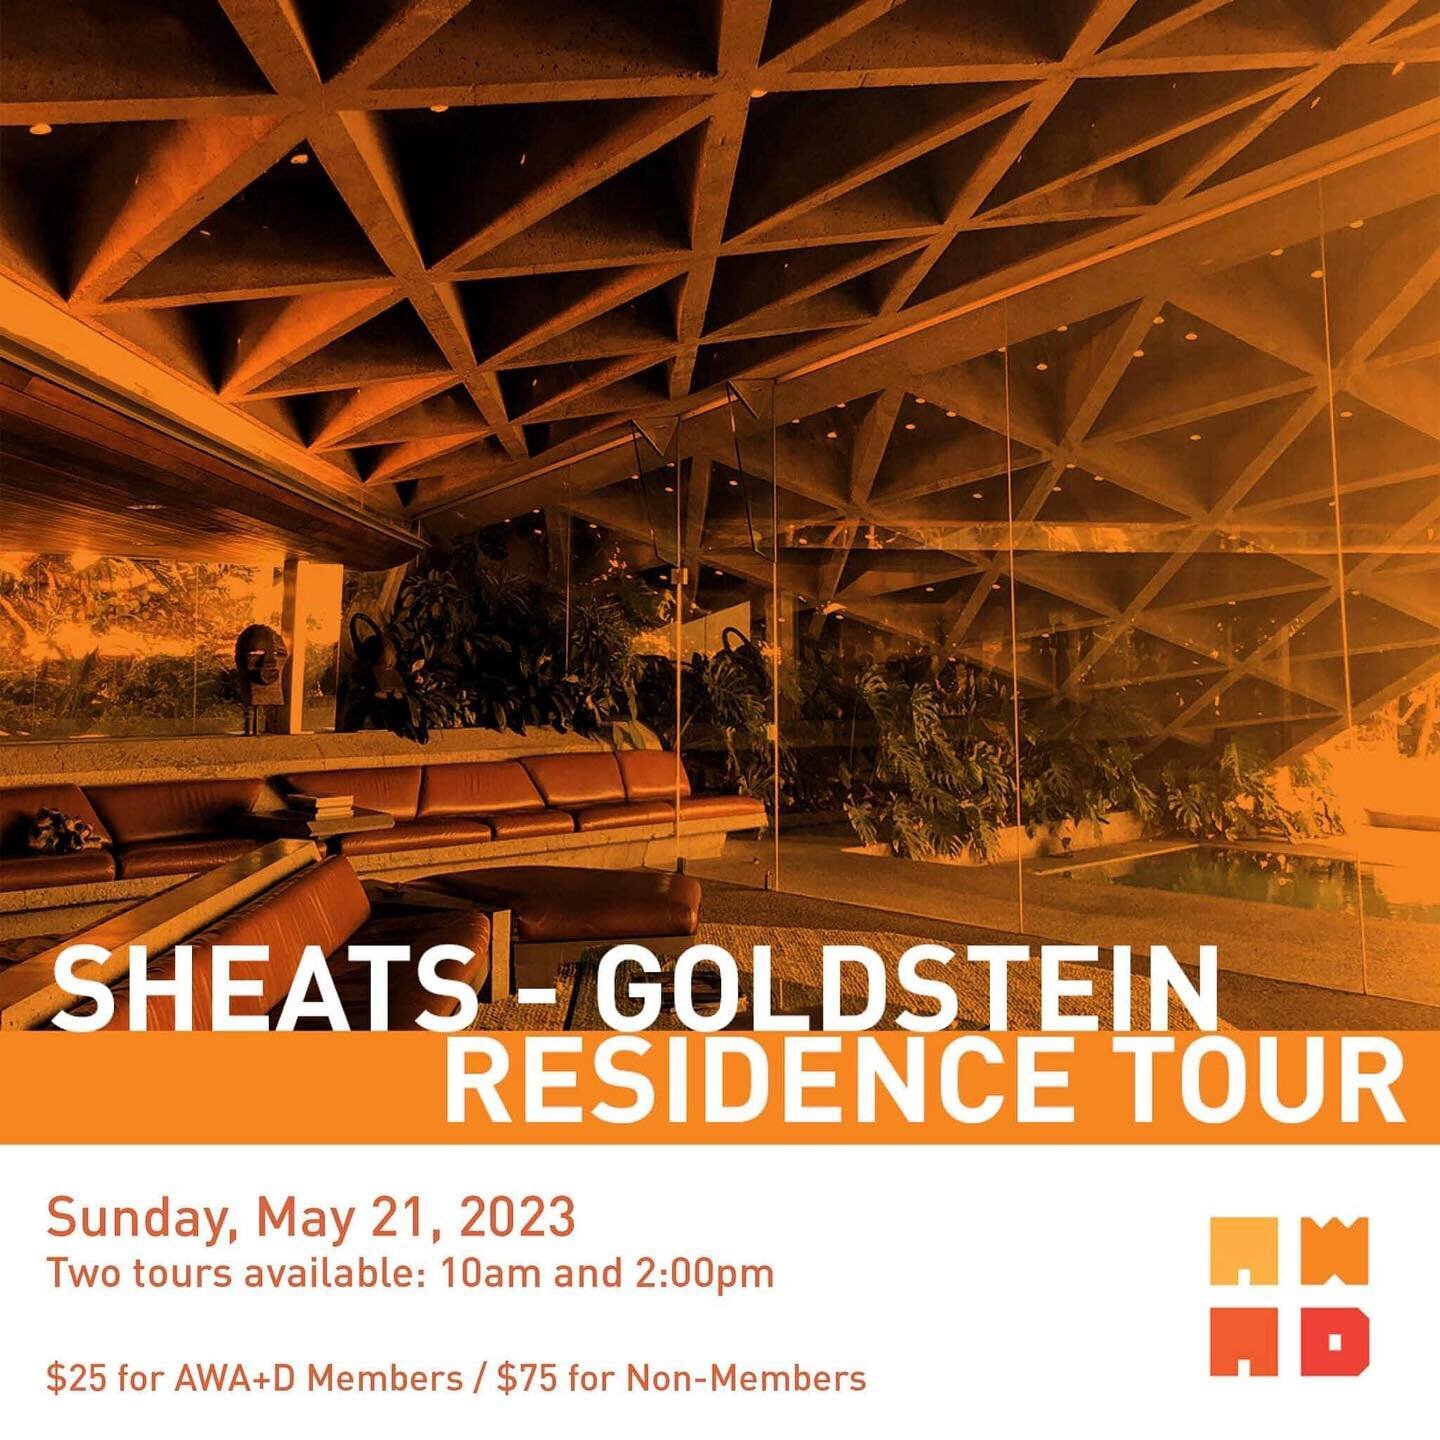 Sheats-Goldstein Residence Tour

Sunday, 05/21 @ 10:00AM
📍Sheats-Goldstein Residence

**2pm tour is SOLDOUT!

We are thrilled to be resuming our annual AWA+D exclusive tour of John Lautner&rsquo;s 1963 masterpiece: the Sheats-Goldstein residence.  I